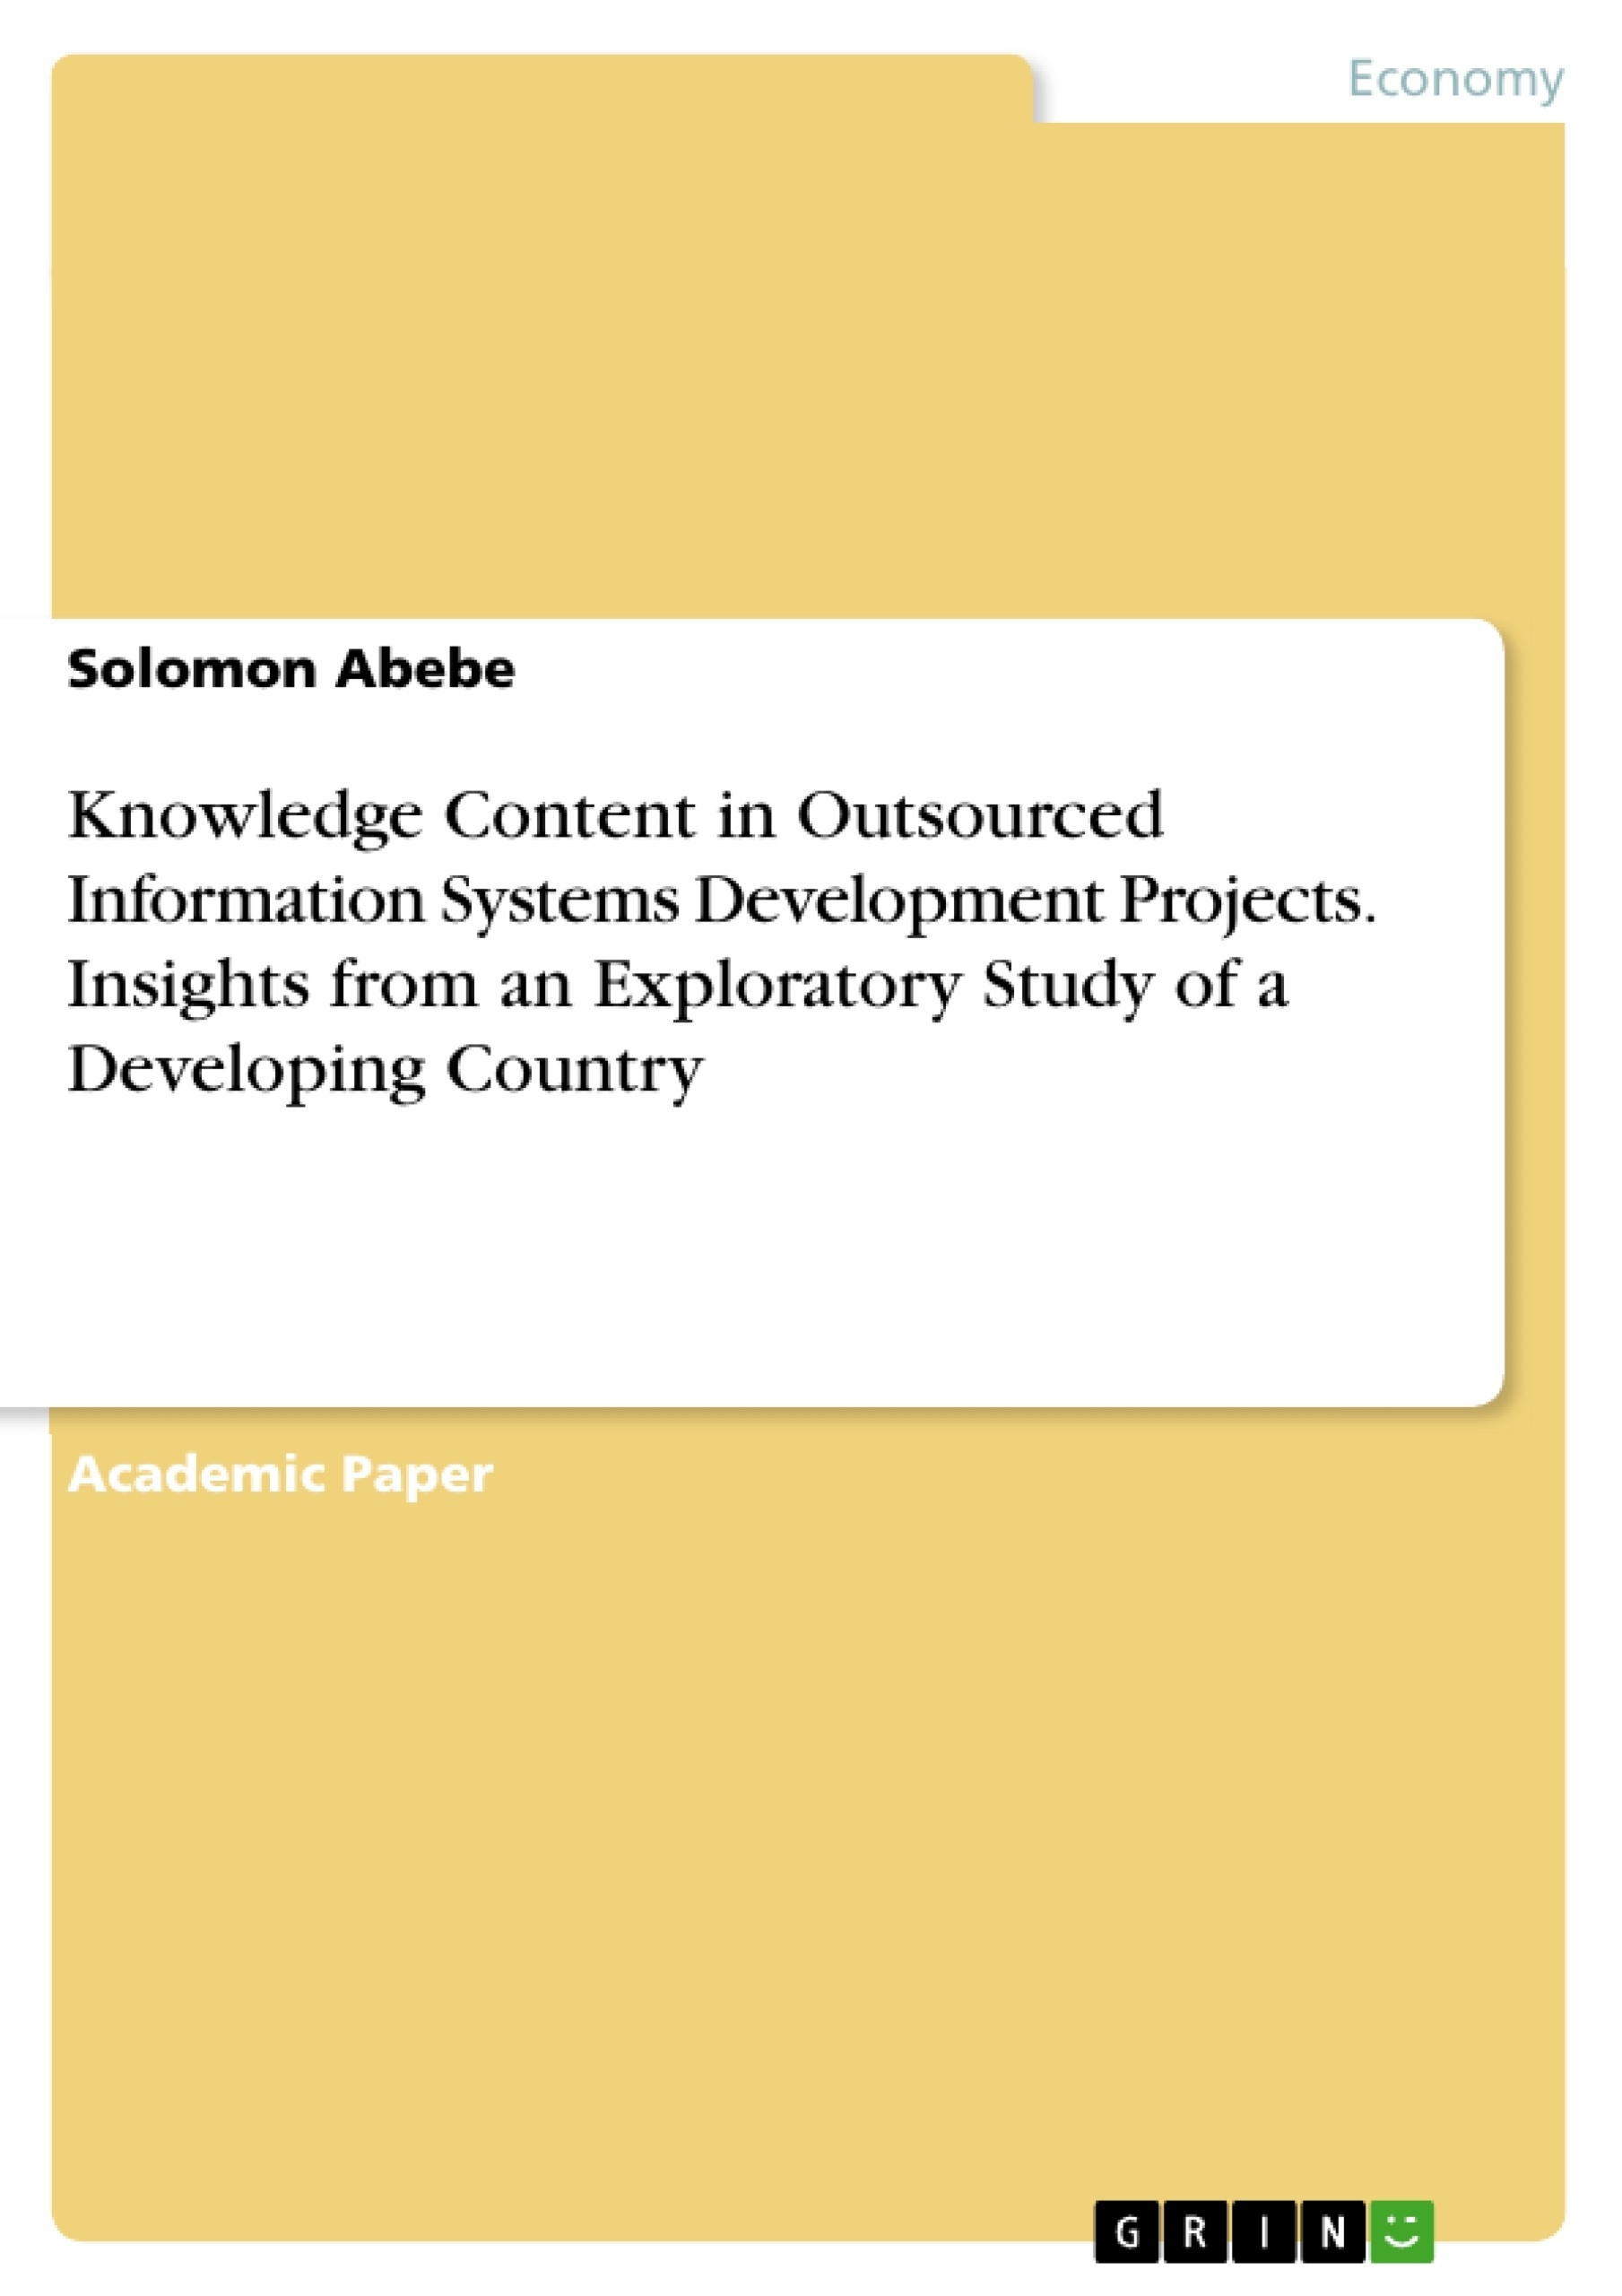 Title: Knowledge Content in Outsourced Information Systems Development Projects. Insights from an Exploratory Study of a Developing Country